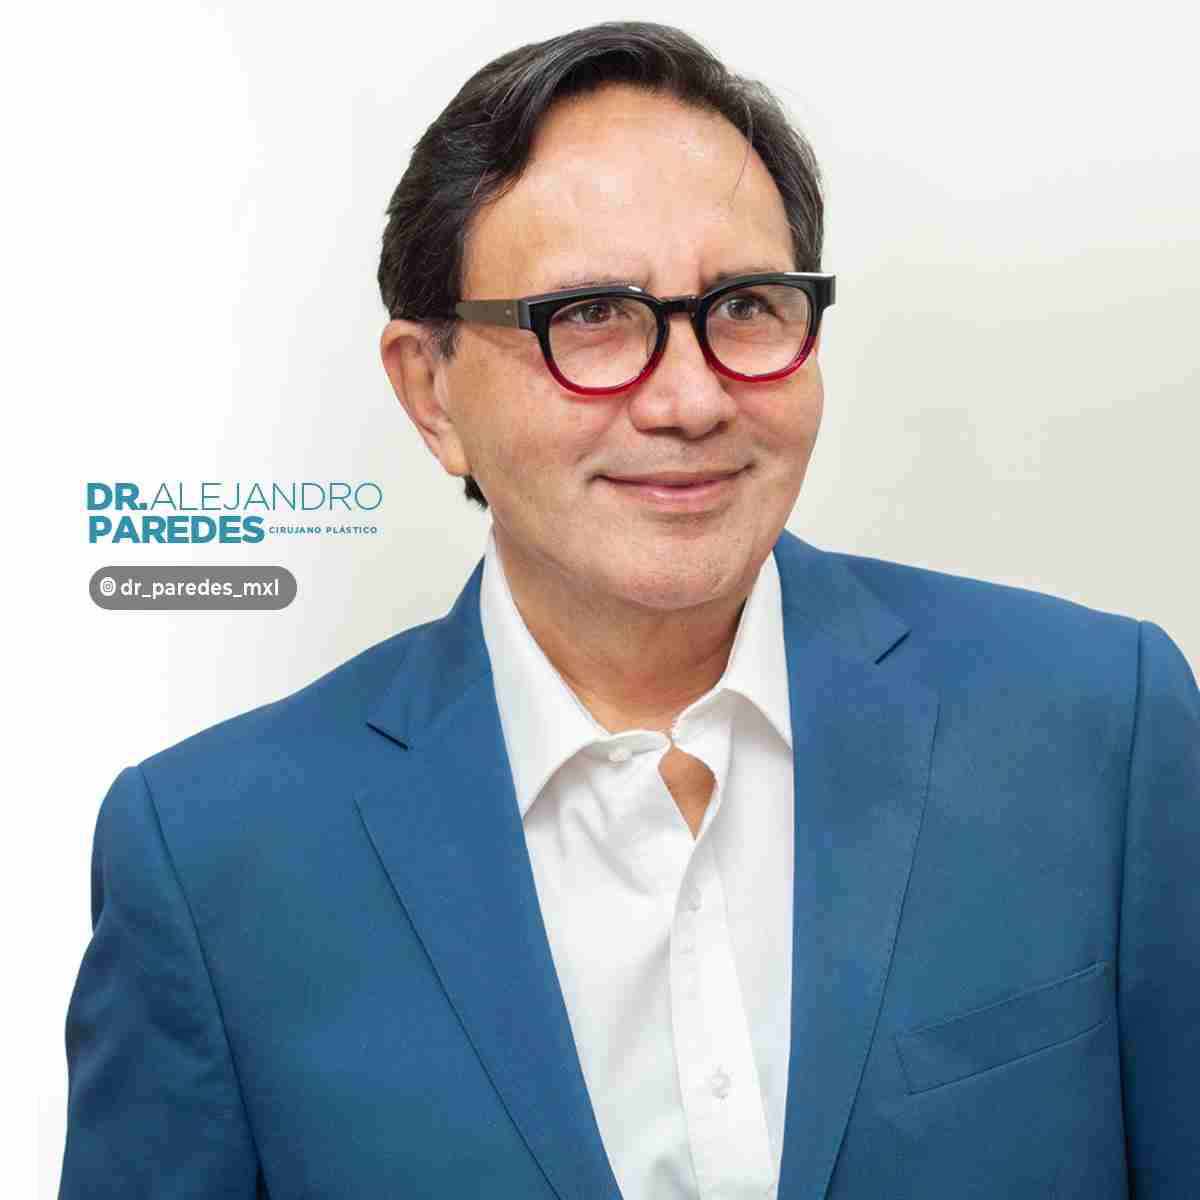 dr paredes plastic surgeon in mexicali mexico